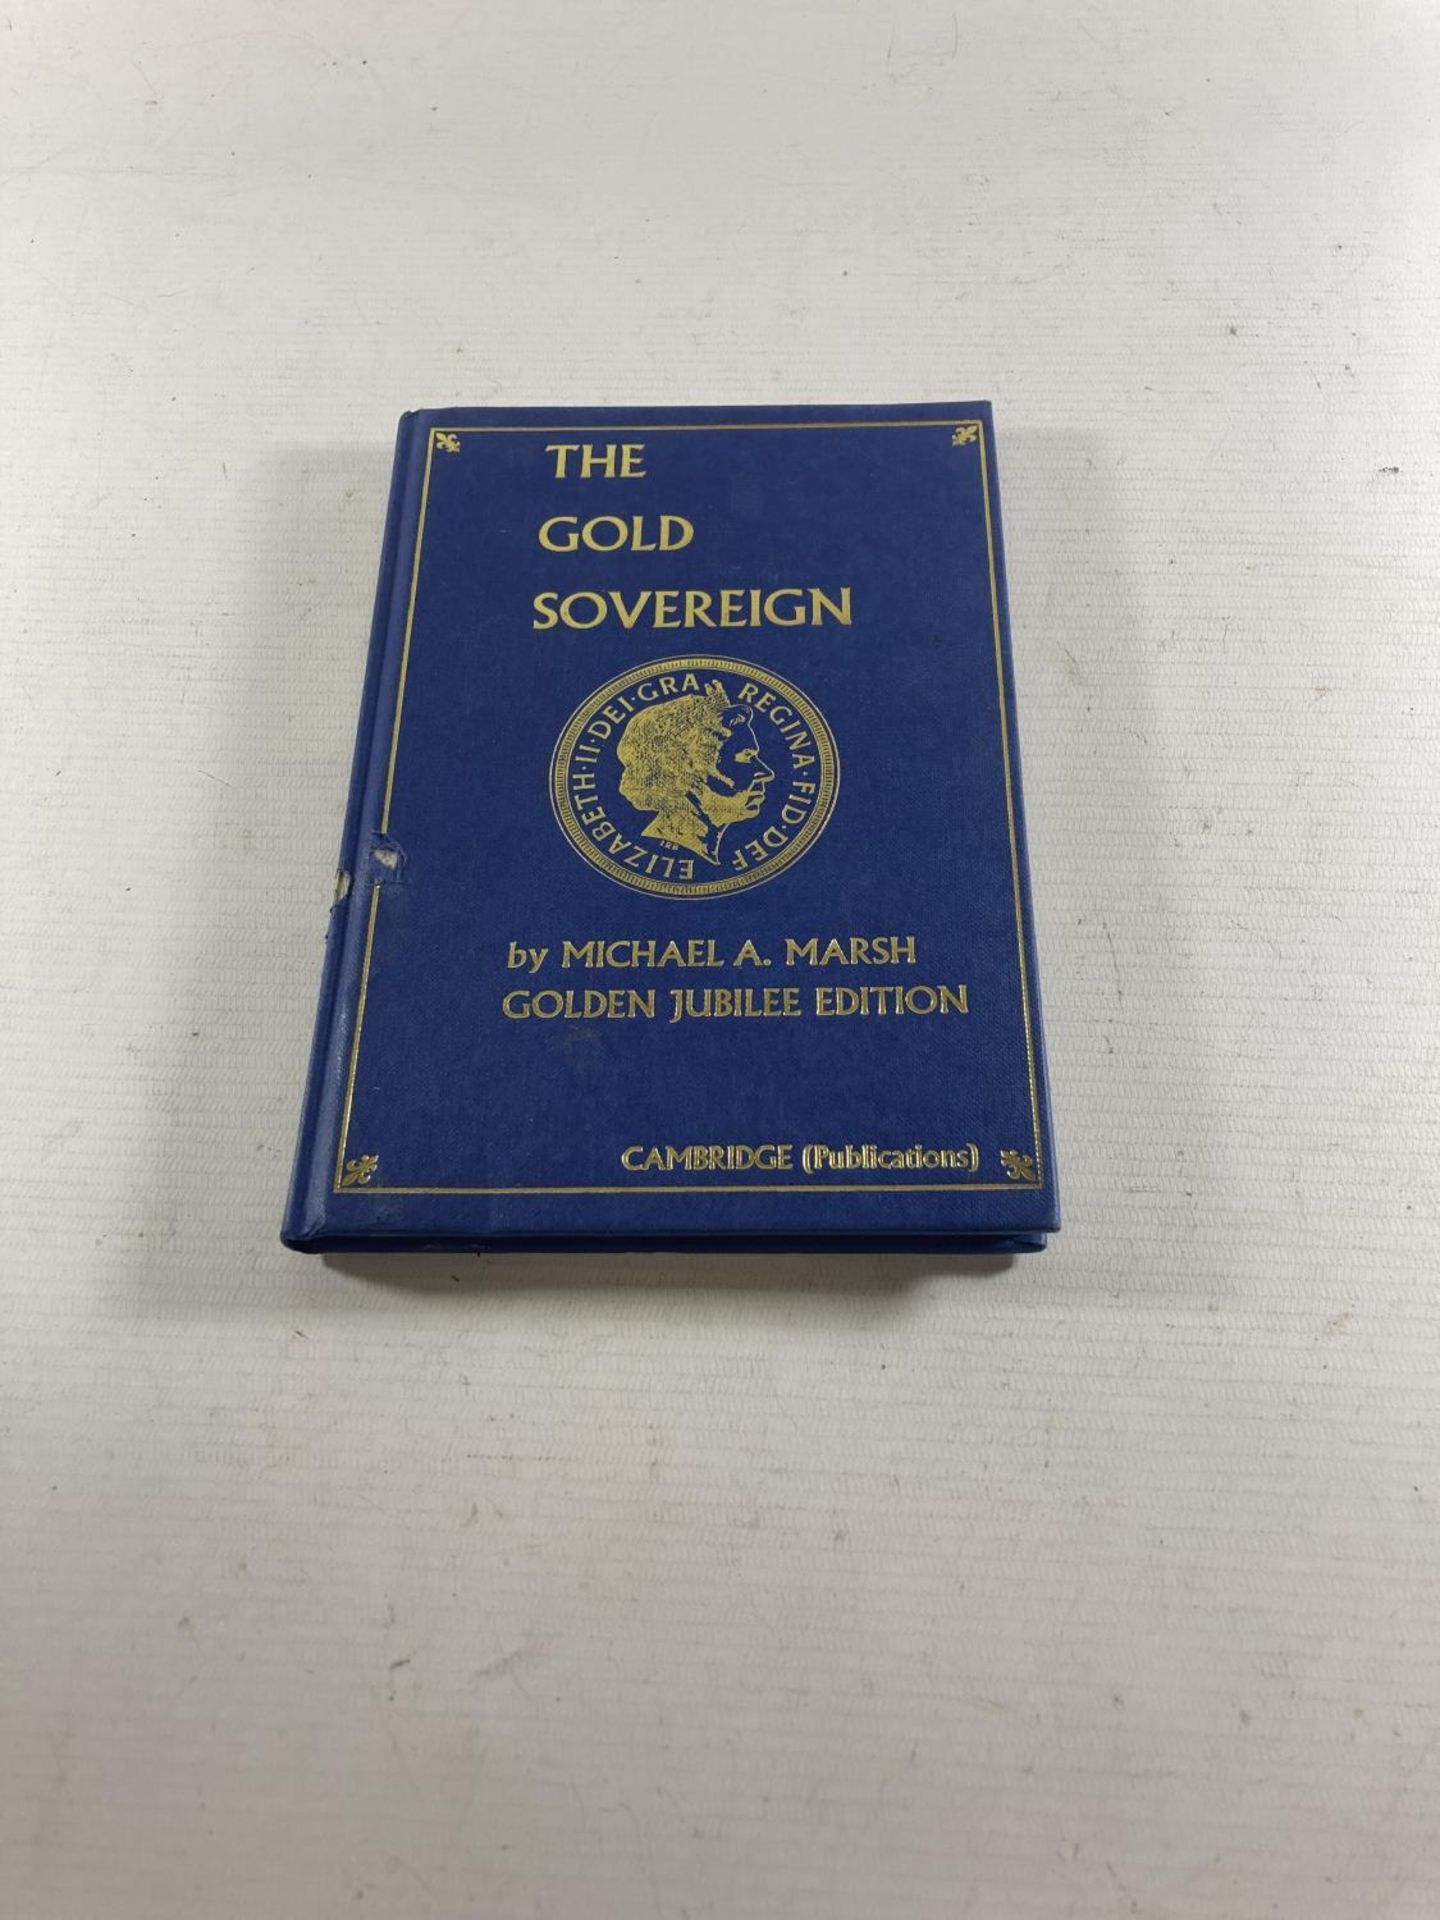 THE GOLD SOVEREIGN HARDBACK BOOK BY MICHAEL A MARSH - GOLDEN JUBILEE EDITION